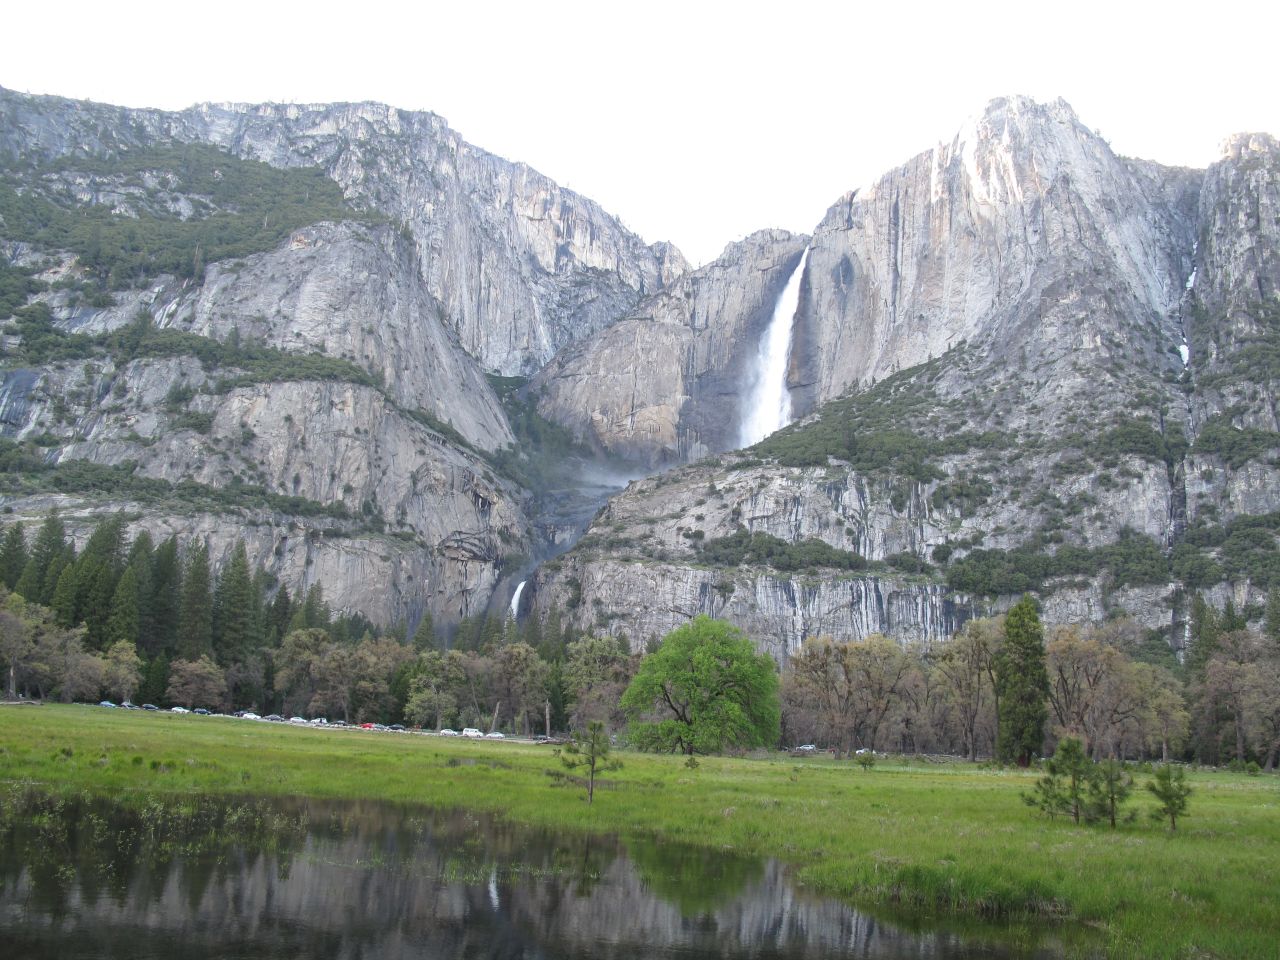 Yosemite Falls, seen here from Cook's Meadow in the spring, provides plenty of photo ops.